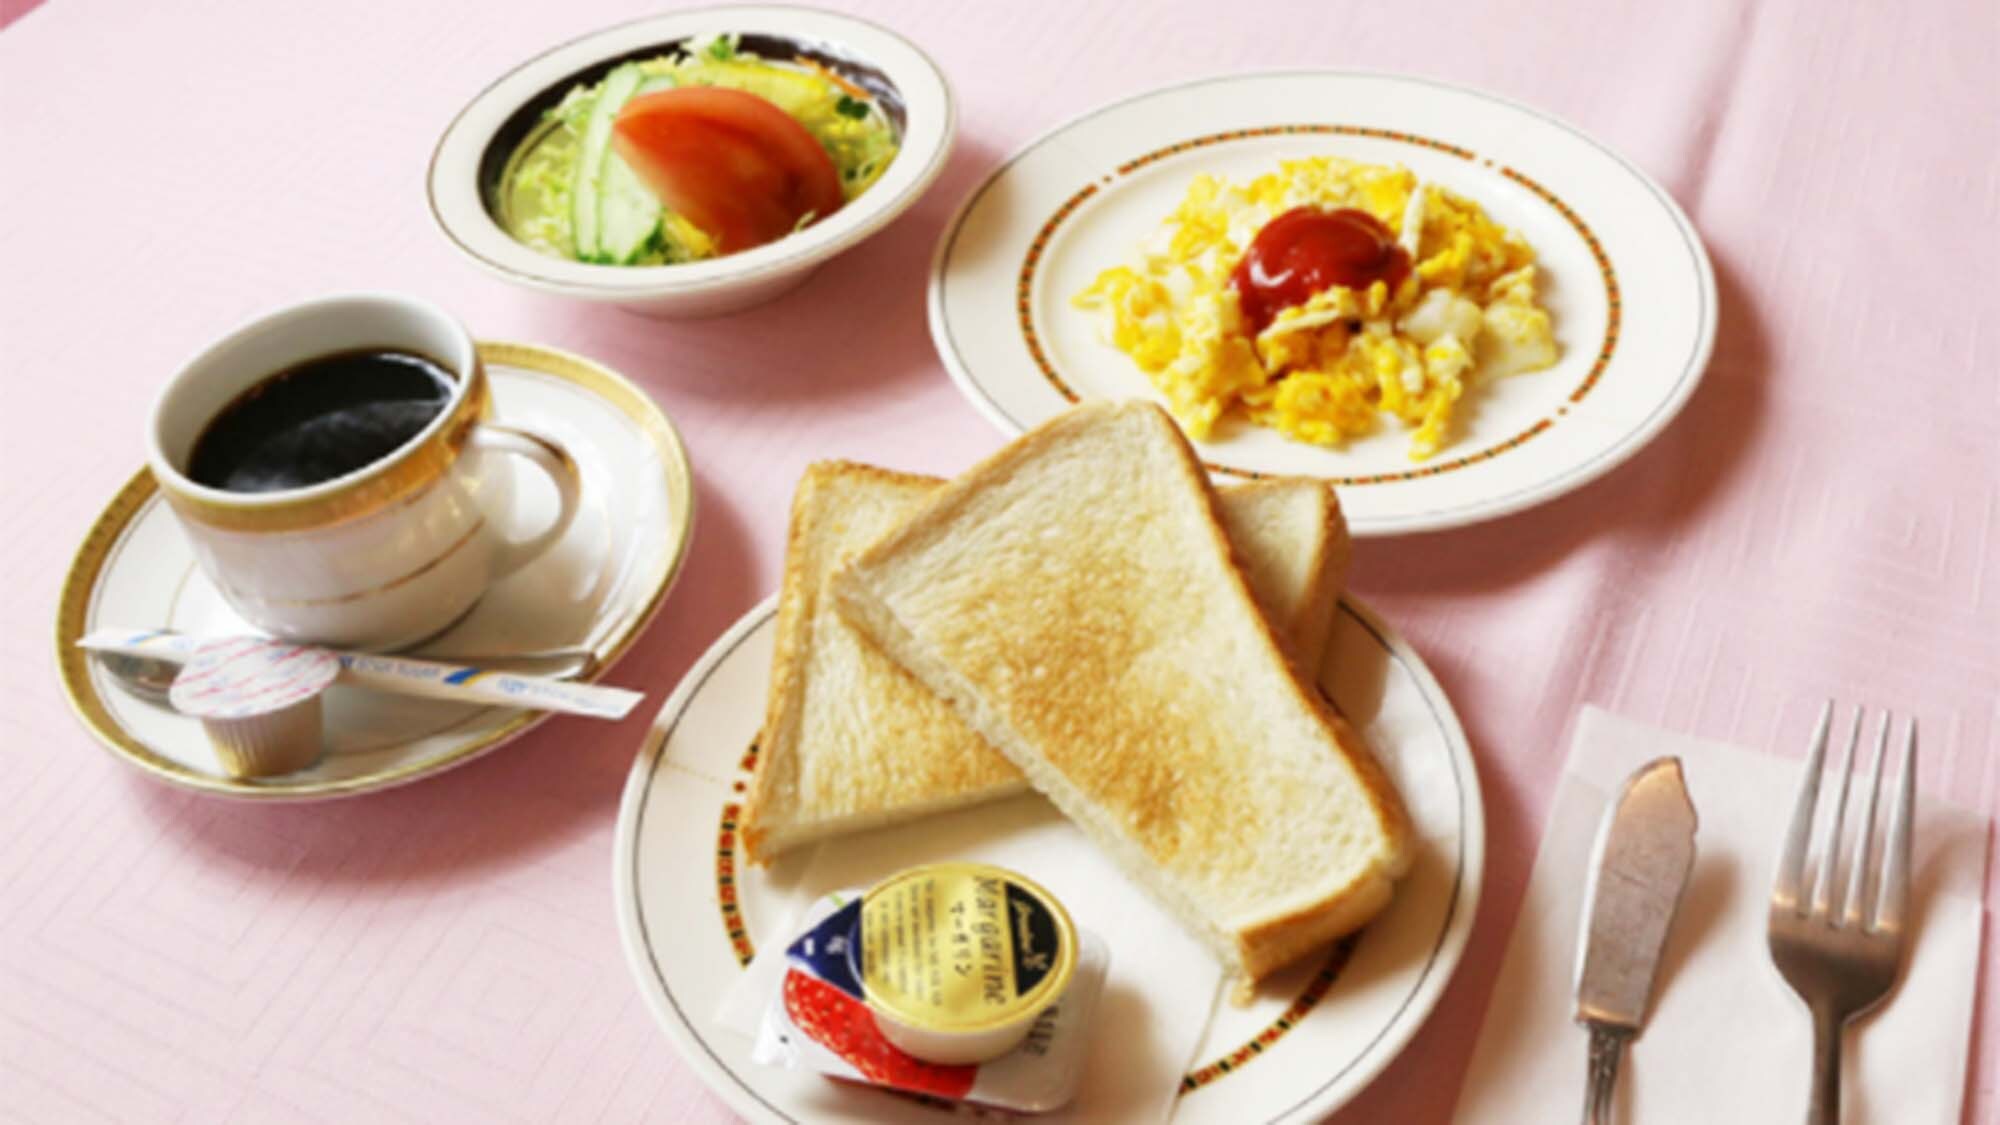 ・ Breakfast (Western food) example: You can enjoy it for 500 yen (excluding tax).